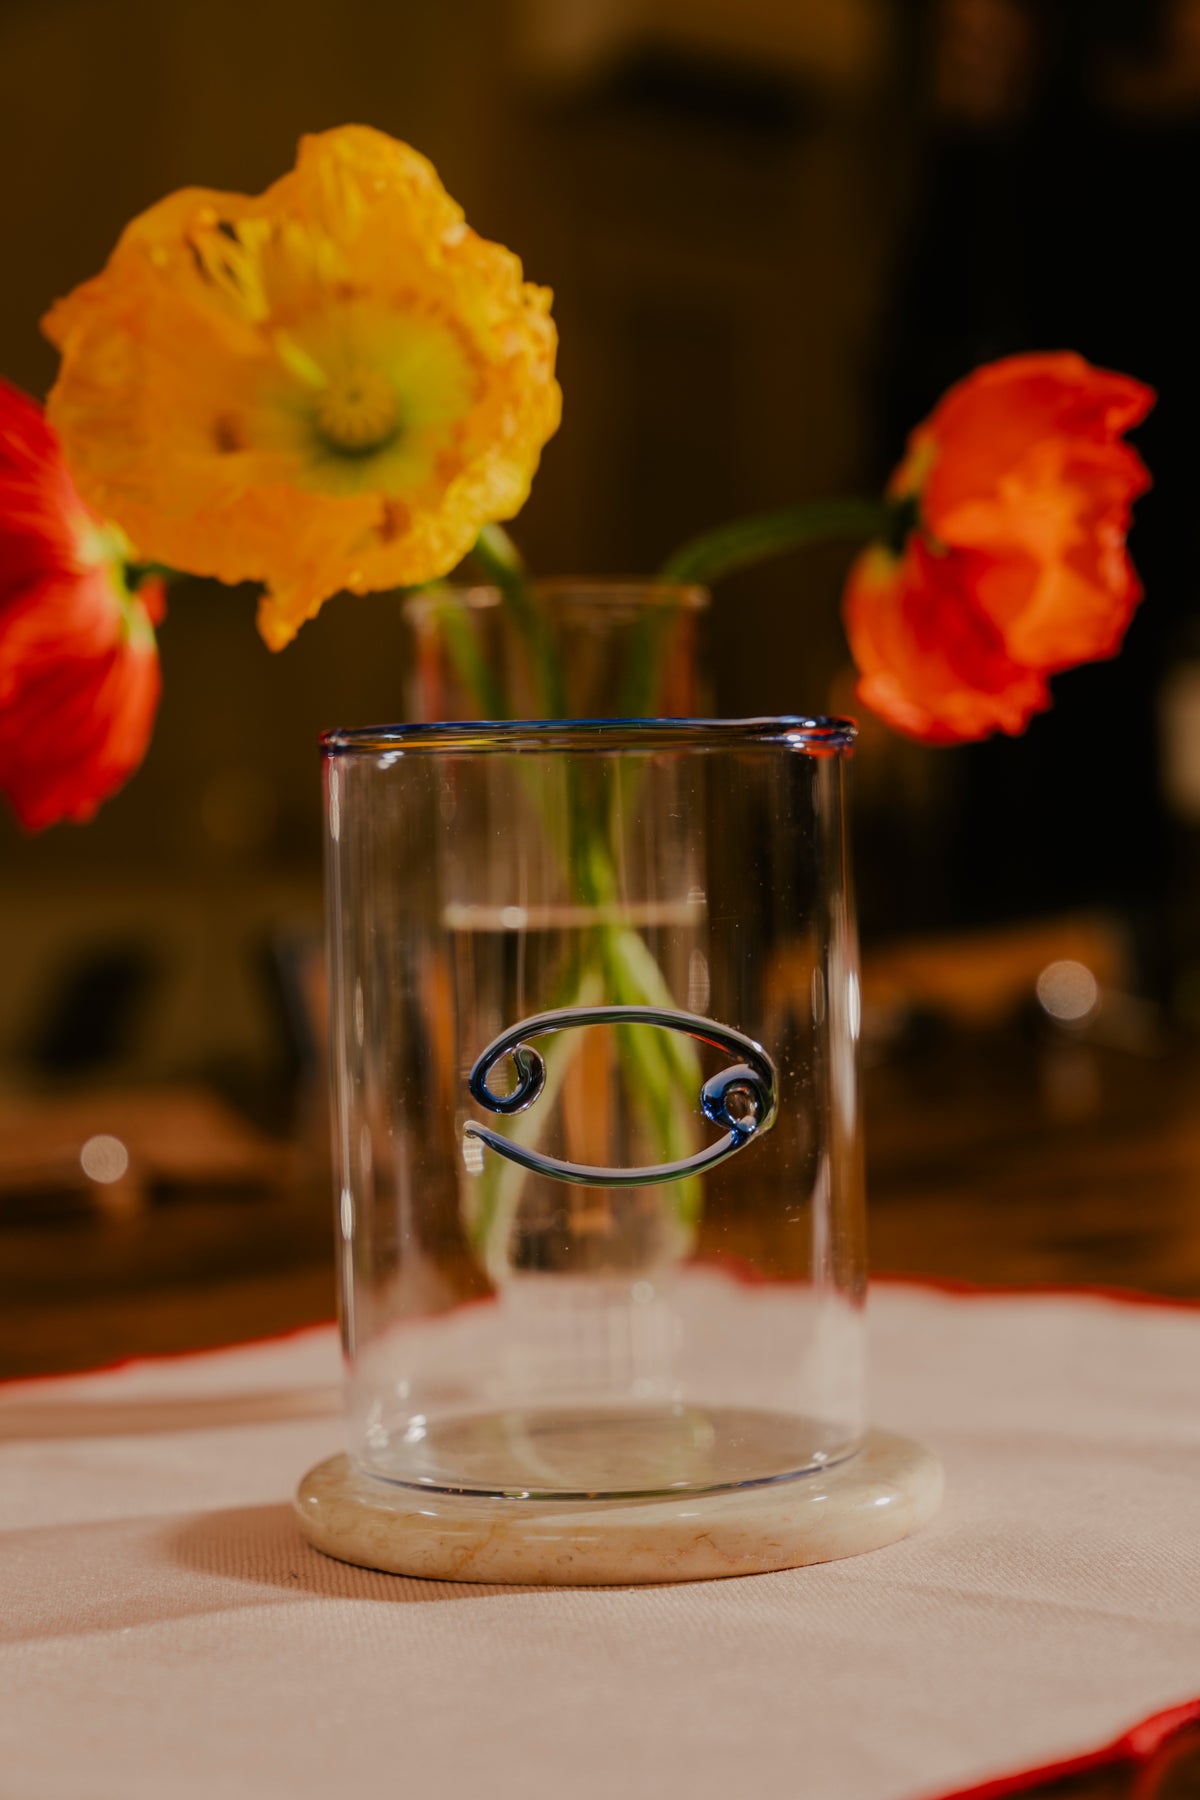 An empty clear lowball glass with a cancer zodiac sign design is centered in the foreground, placed on a marble coaster atop a beige cloth surface. The glass is framed by vibrant poppy flowers, with a yellow bloom to the left and a red one to the right, both slightly blurred, adding a lively splash of color to the scene.